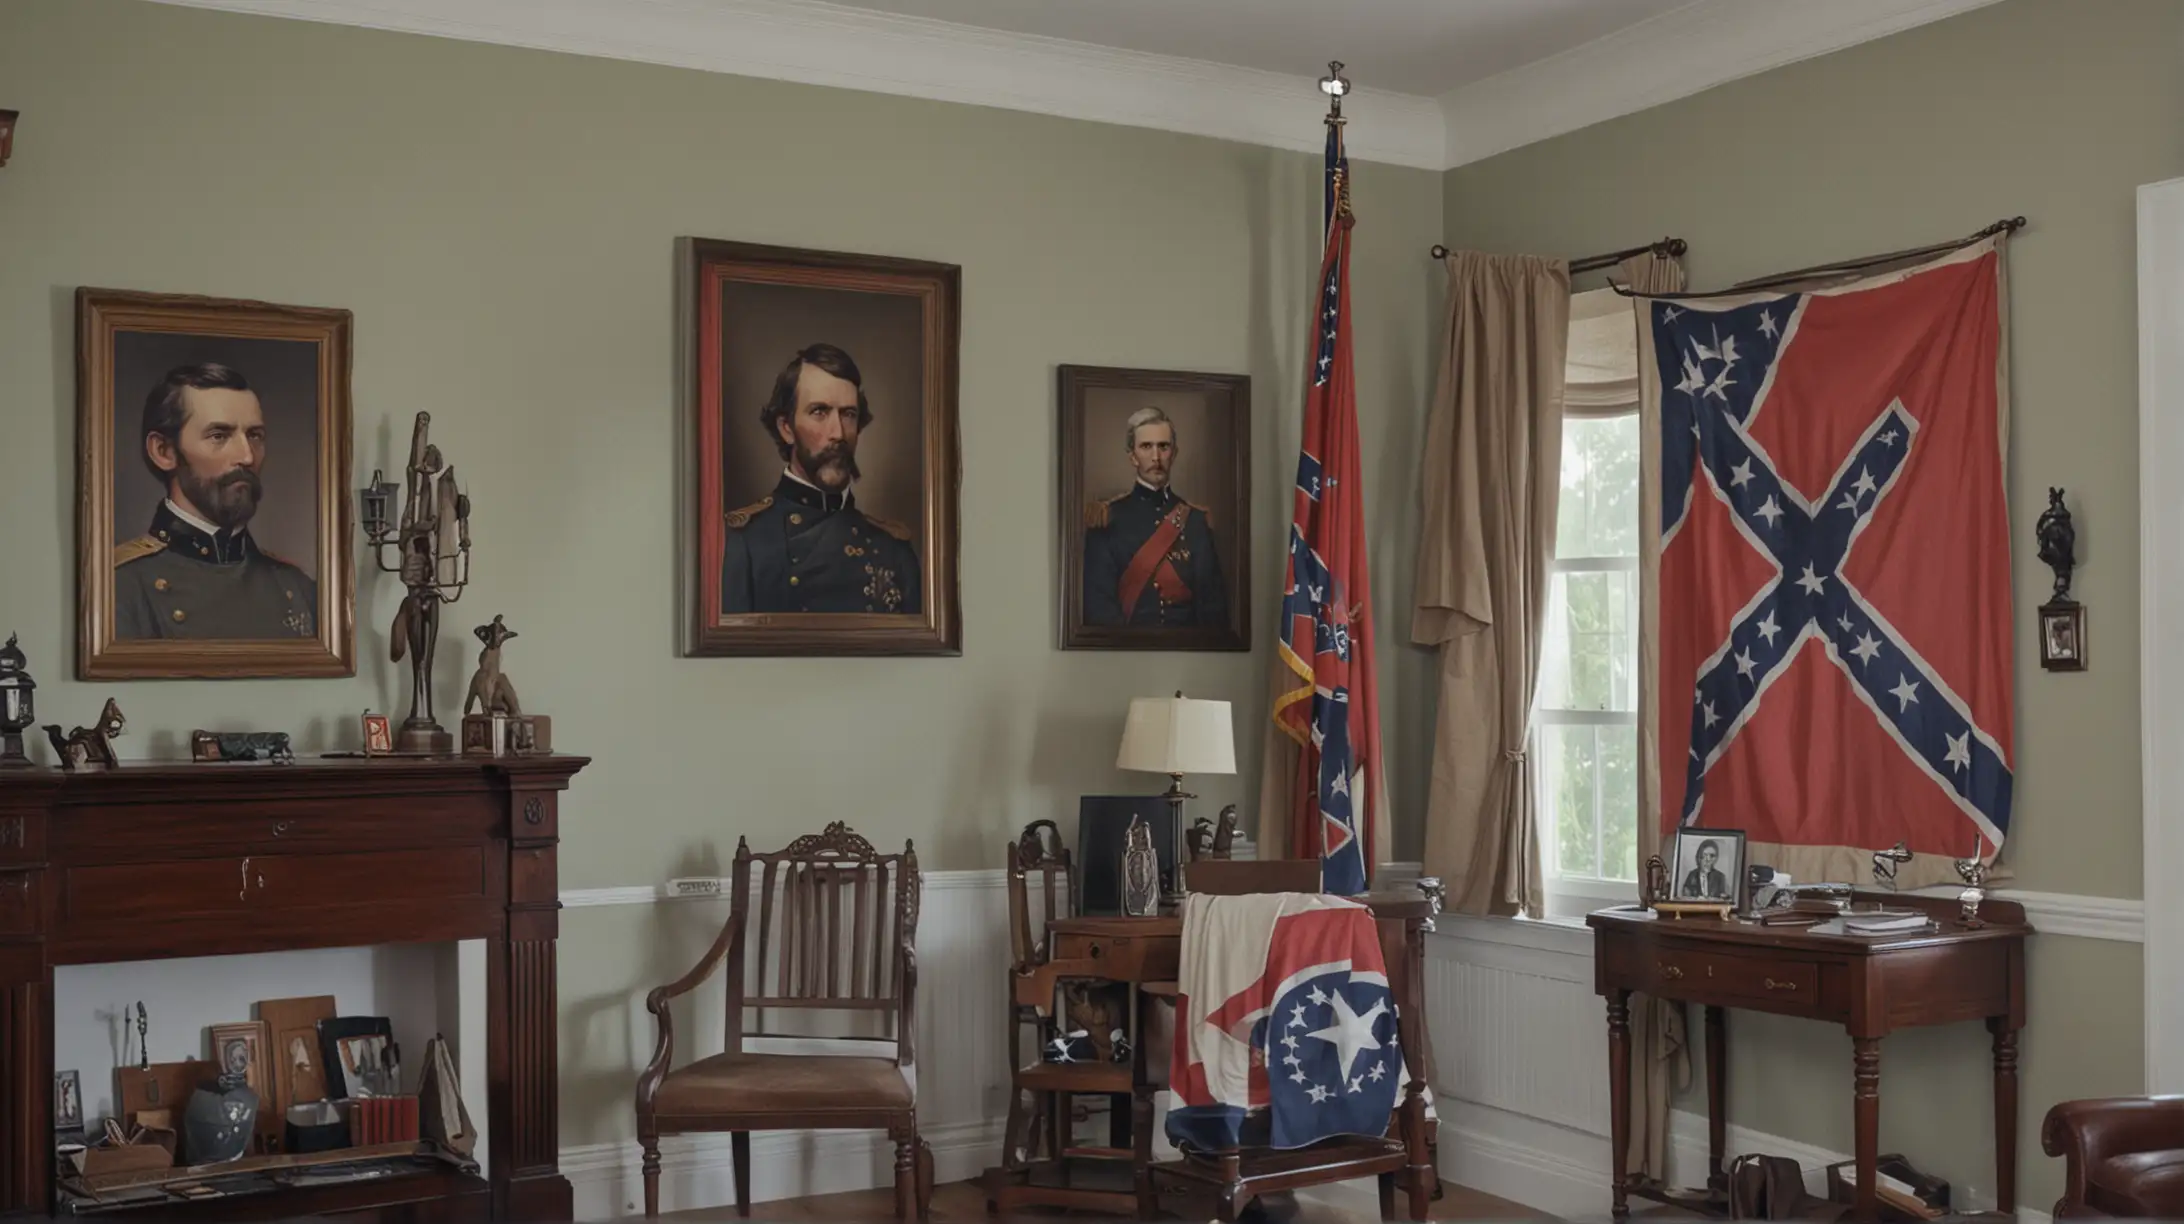 A medium shot of a room with a painting of a Confederate general and other Confederate memorabilia in a nice suburban house.